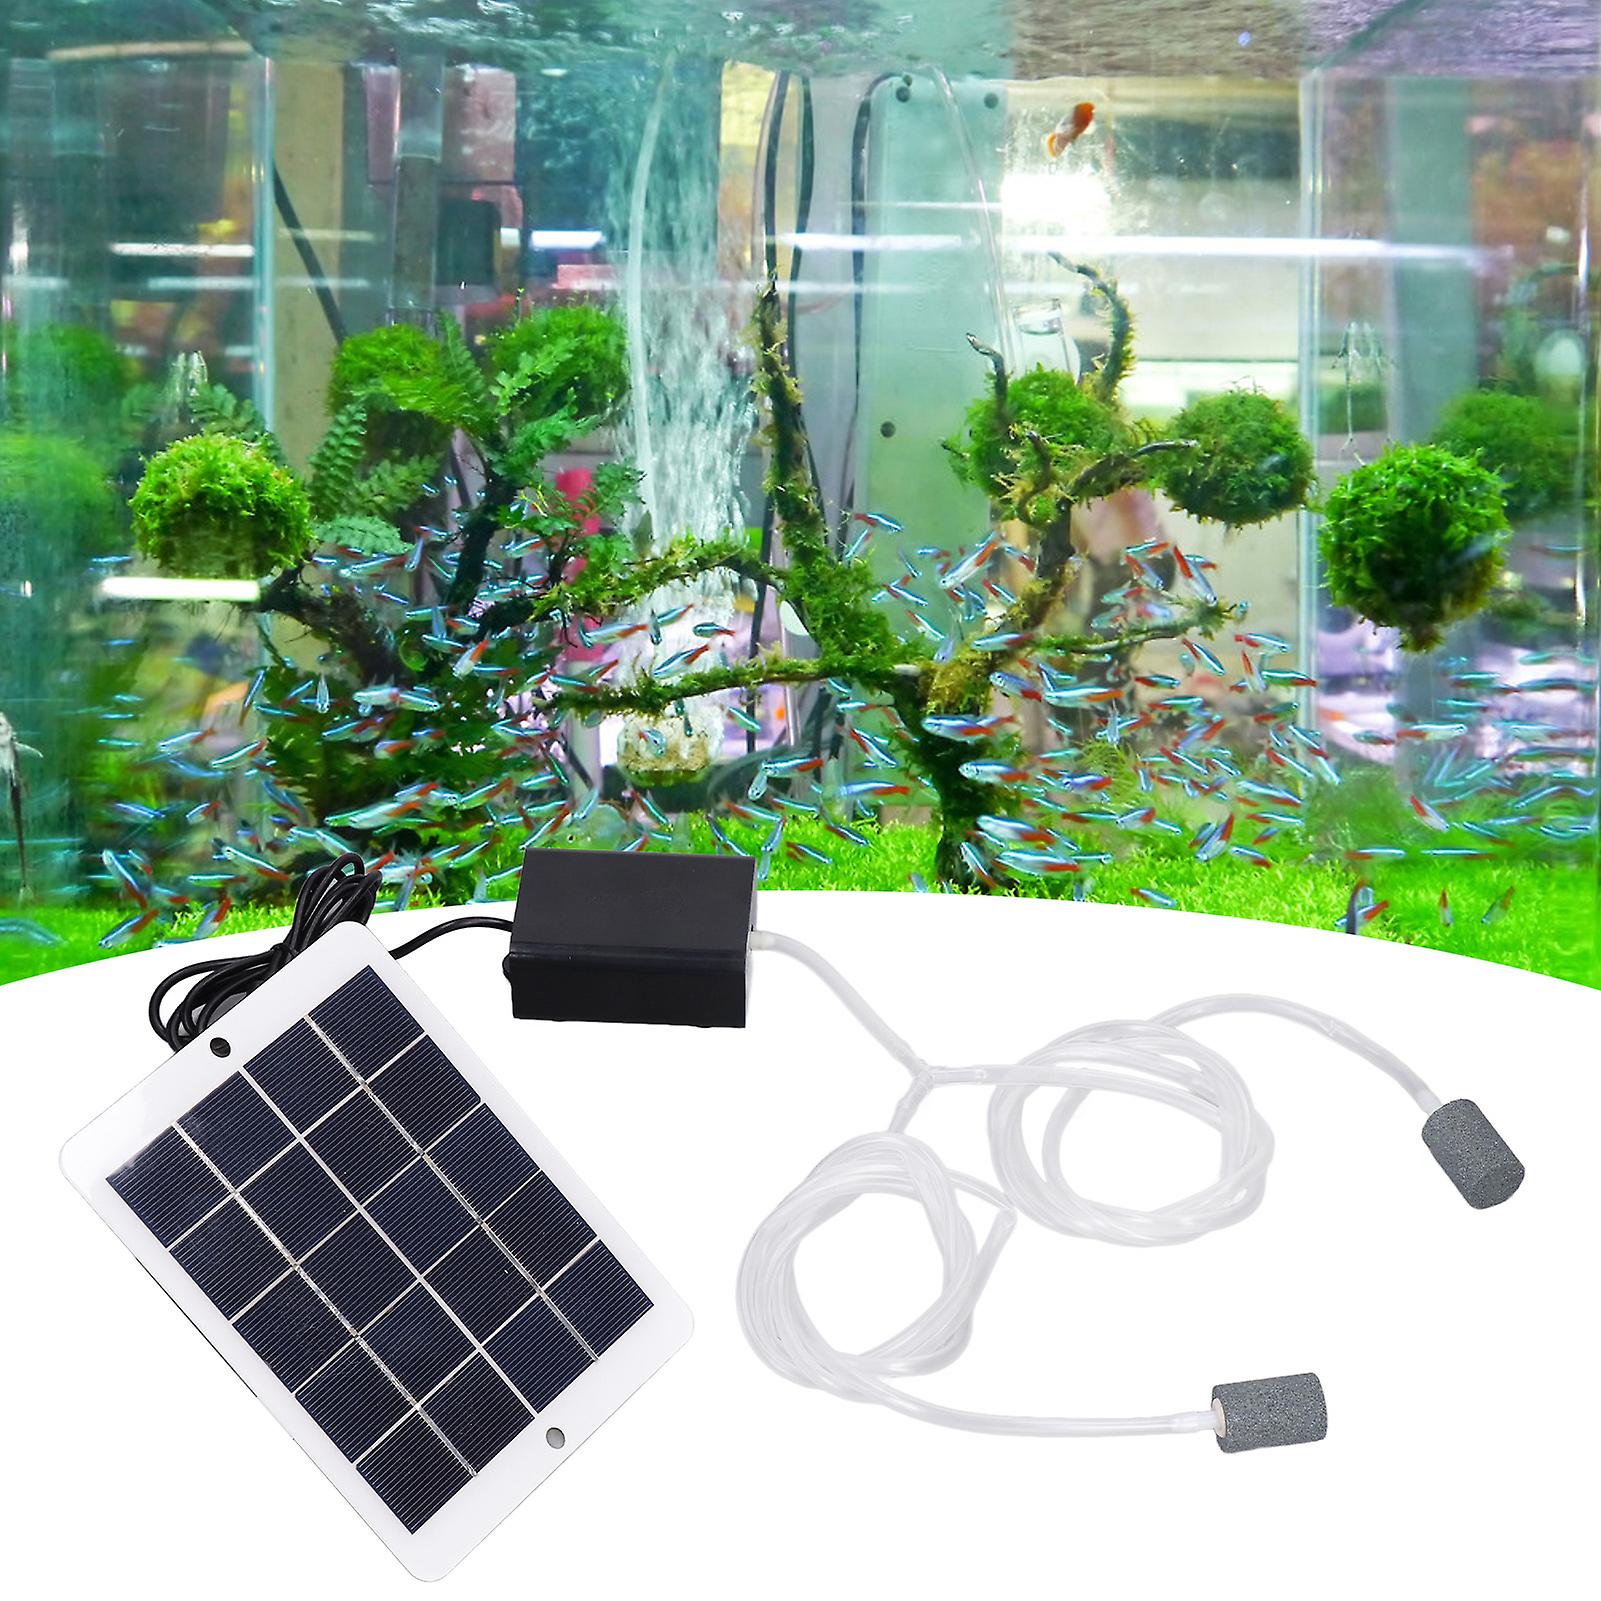 Solar Oxygen Pump， Multi Purpose Rechargeable Air Pump No Noise Portable Fishing Aerator Oxygen Supply For Garden Fish Tank Pool